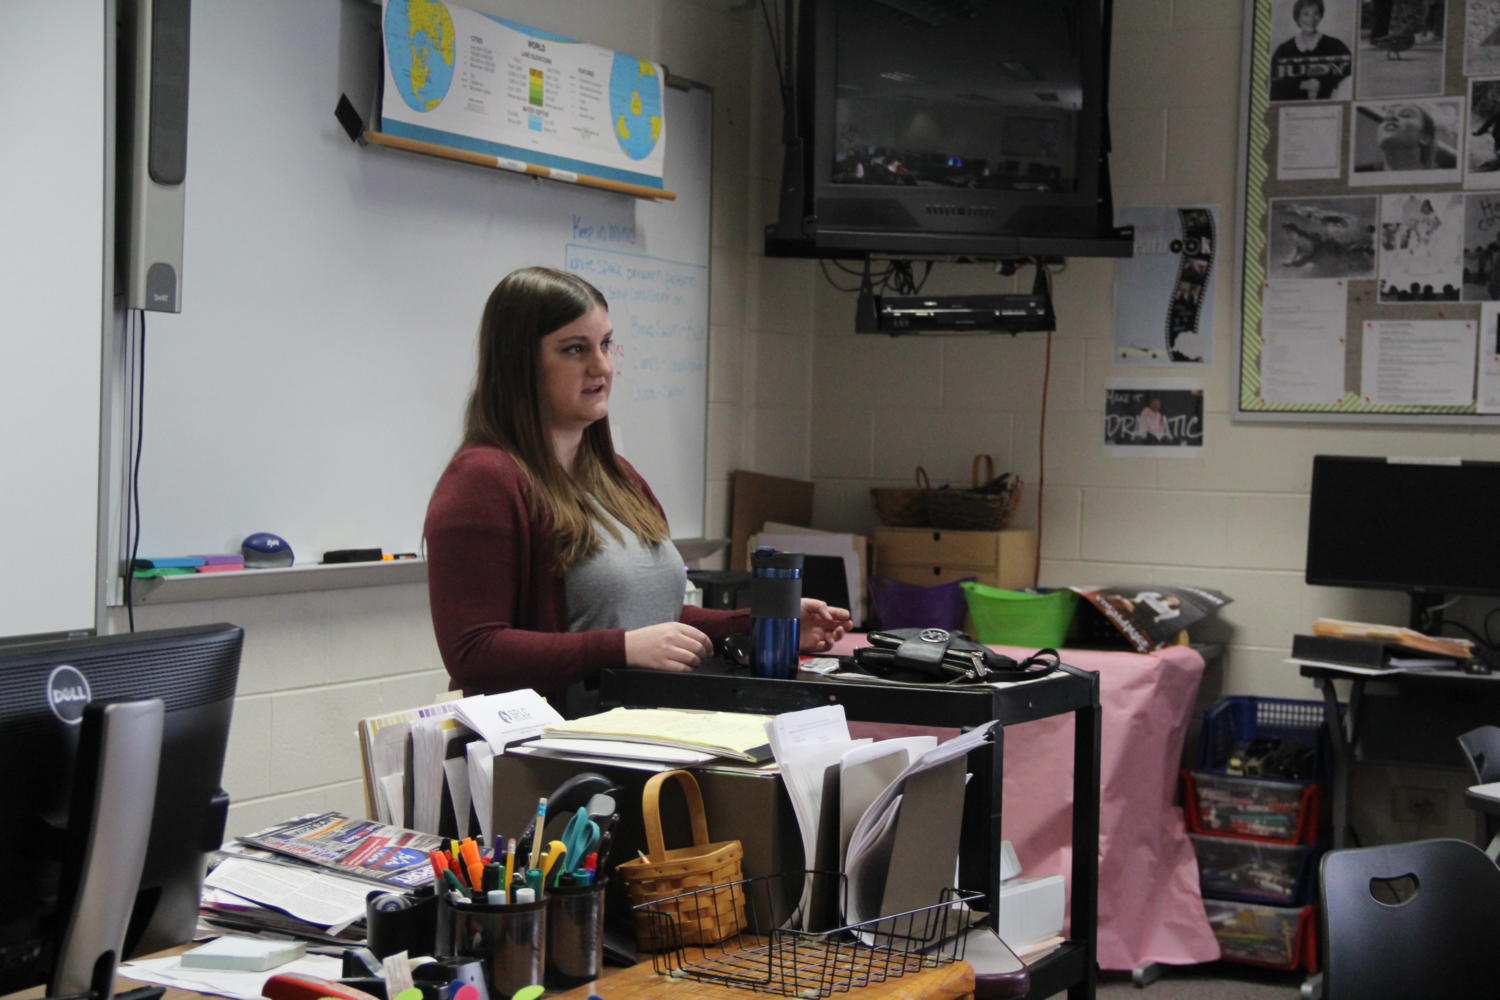 Student Journalists Learn Tools of Trade